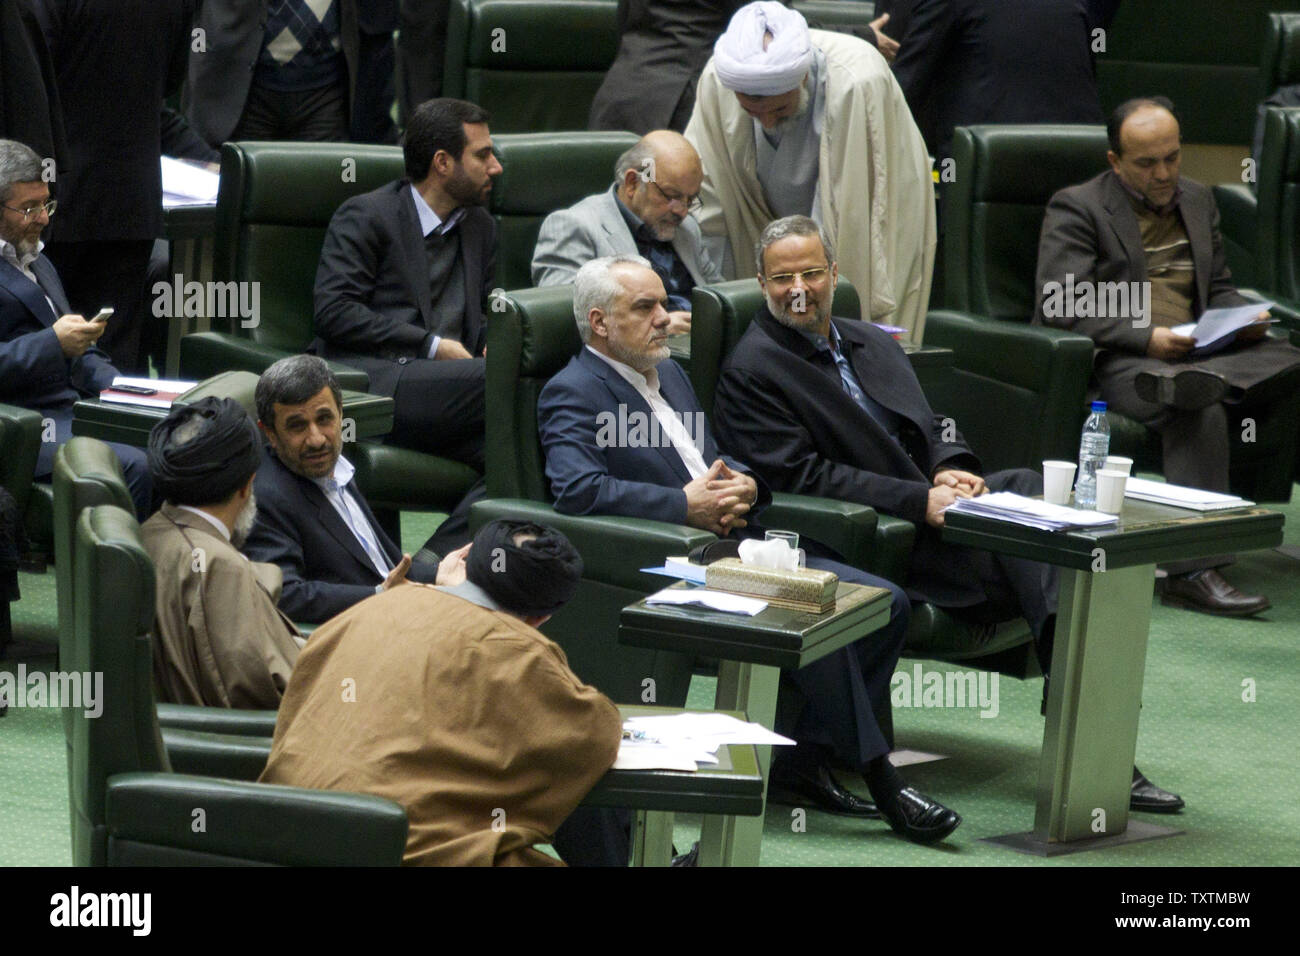 (L-R) Iranian President Mahmoud Ahmadinejad speaks to unidentified lawmakers as his Vice President, Mohammad Reza Rahimi, sits next to labor minister Abdolreza Sheikholeslami (R) during  impeachment of Sheikholeslami at the parliament in Tehran, Iran on February 3, 2013. The main reason behind MP's decision to dismiss the minister was Sheikholeslami's refusal  to remove former Tehran prosecutor general Saeed Mortazavi from his post as the director of the Social Security Organization.     UPI/Maryam Rahmanian Stock Photo